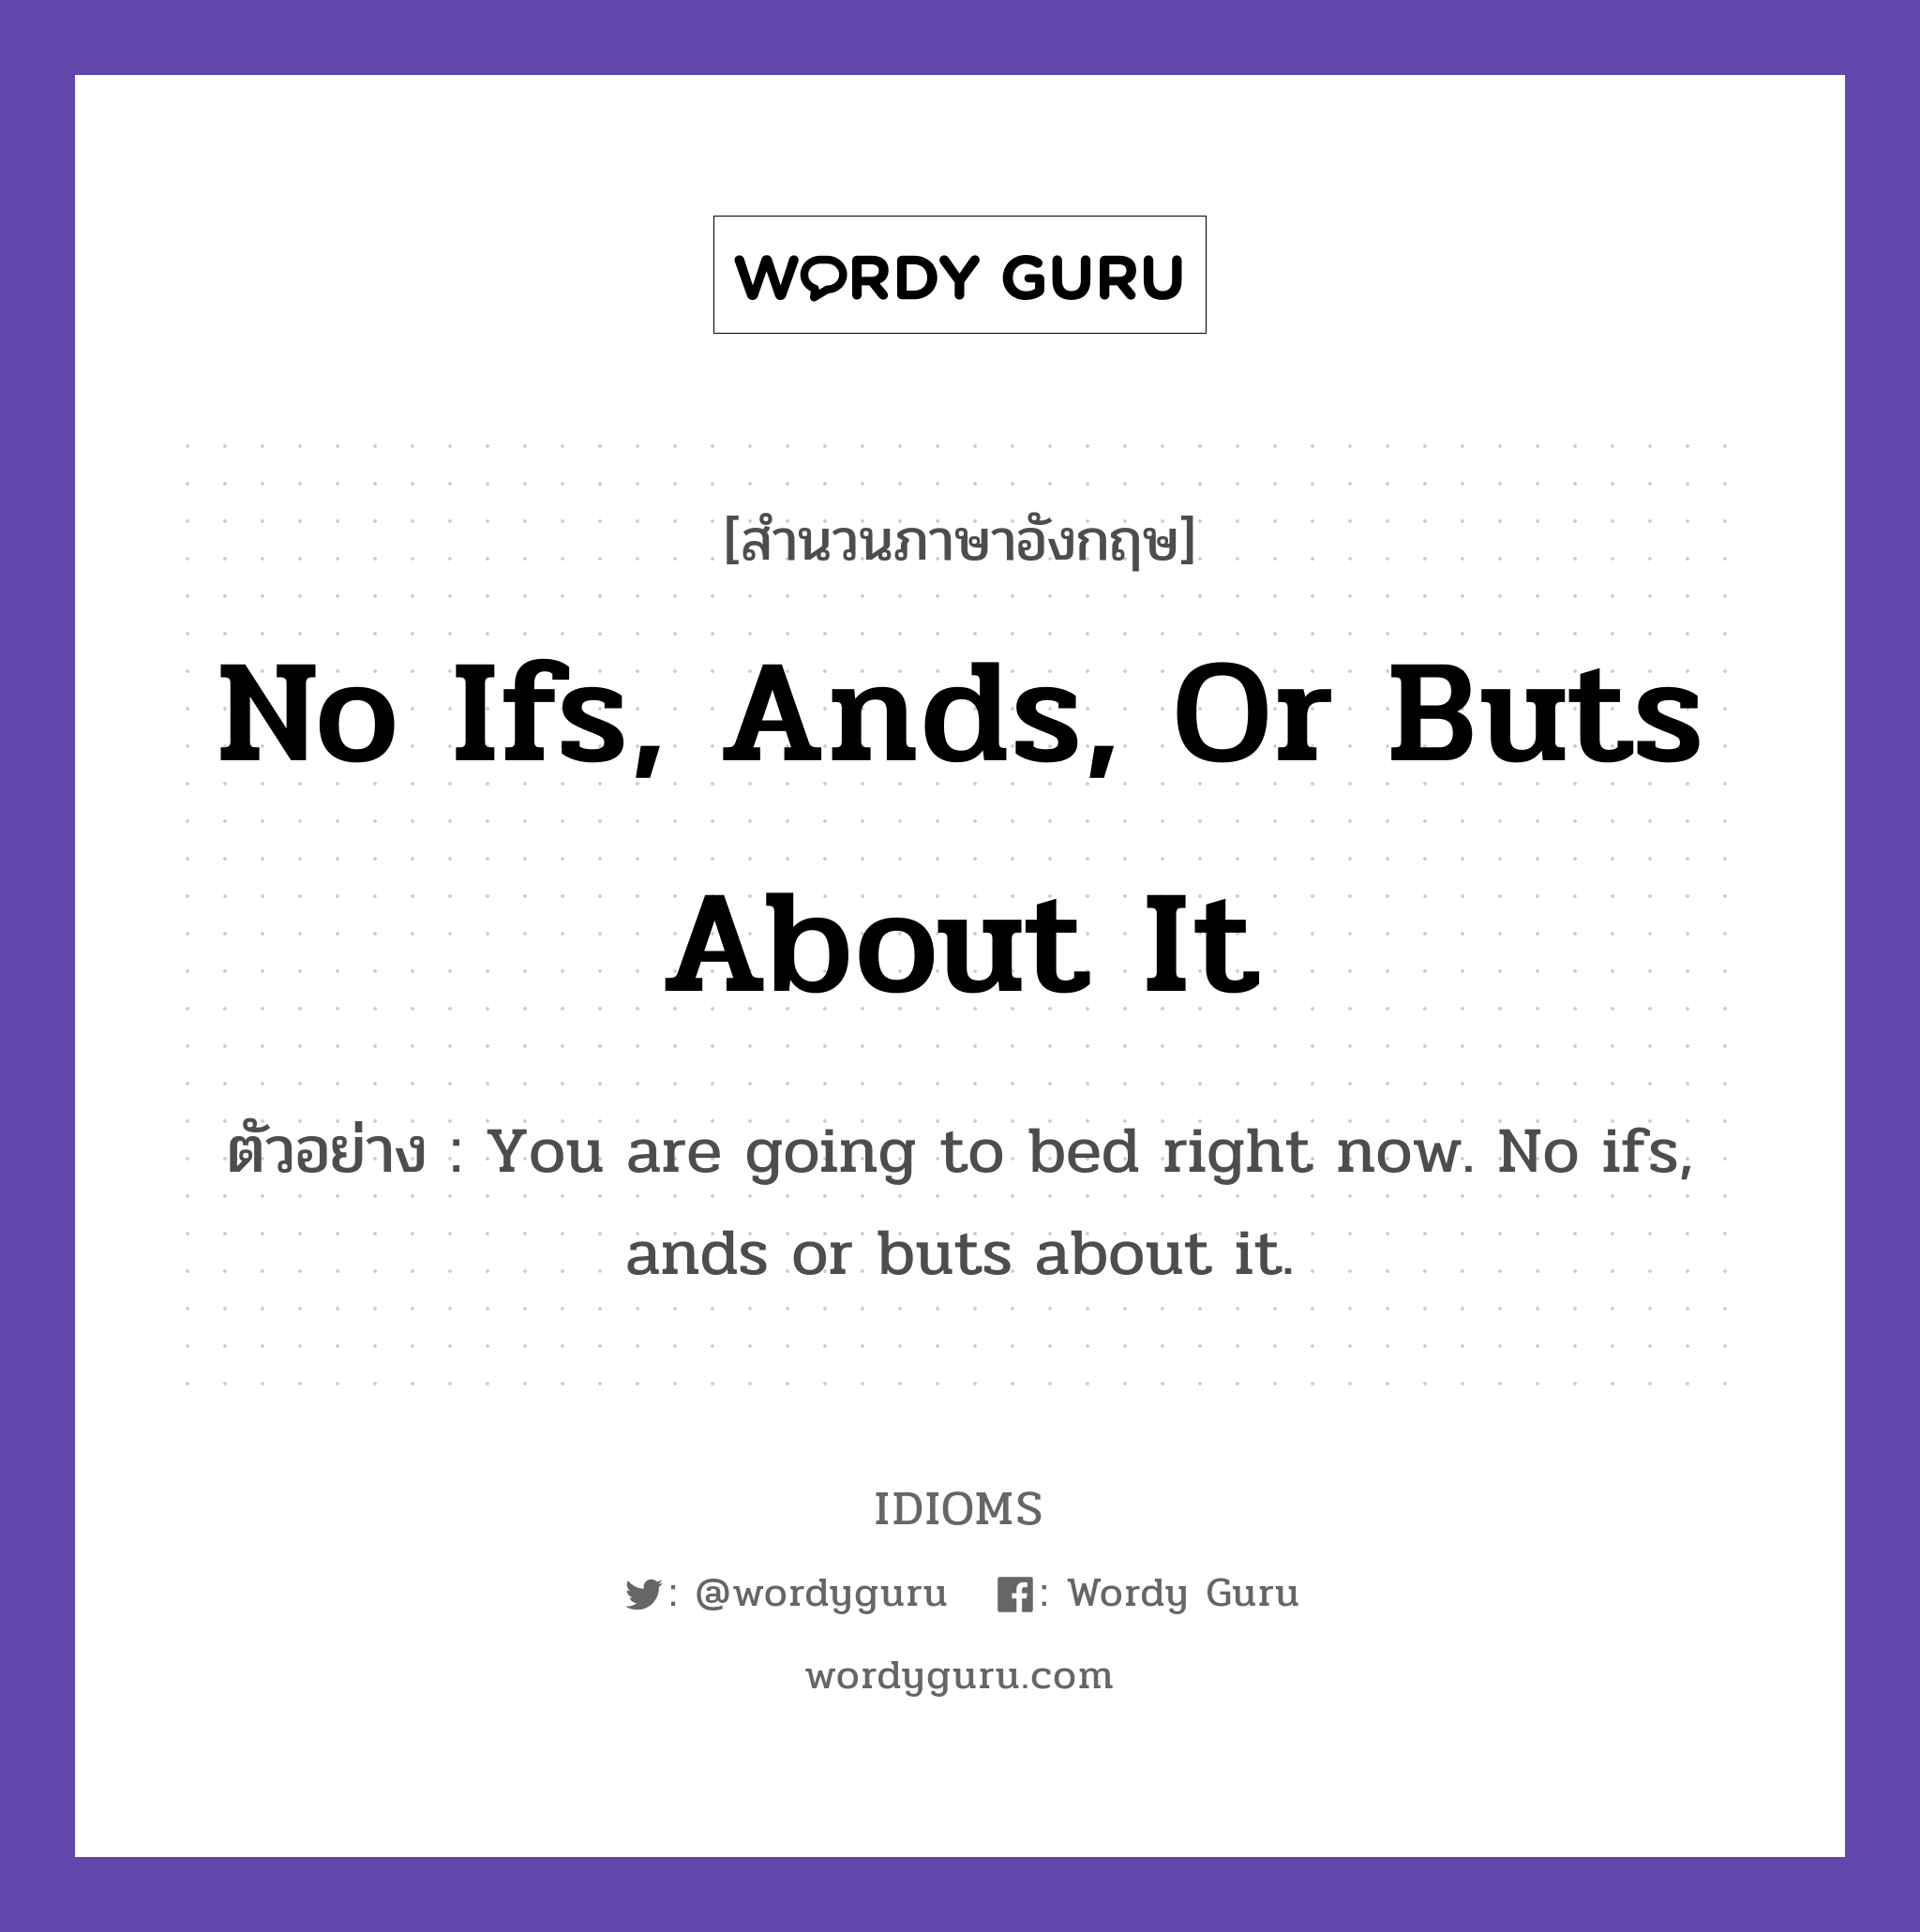 No Ifs, Ands, Or Buts About It แปลว่า?, สำนวนภาษาอังกฤษ No Ifs, Ands, Or Buts About It ตัวอย่าง You are going to bed right now. No ifs, ands or buts about it.